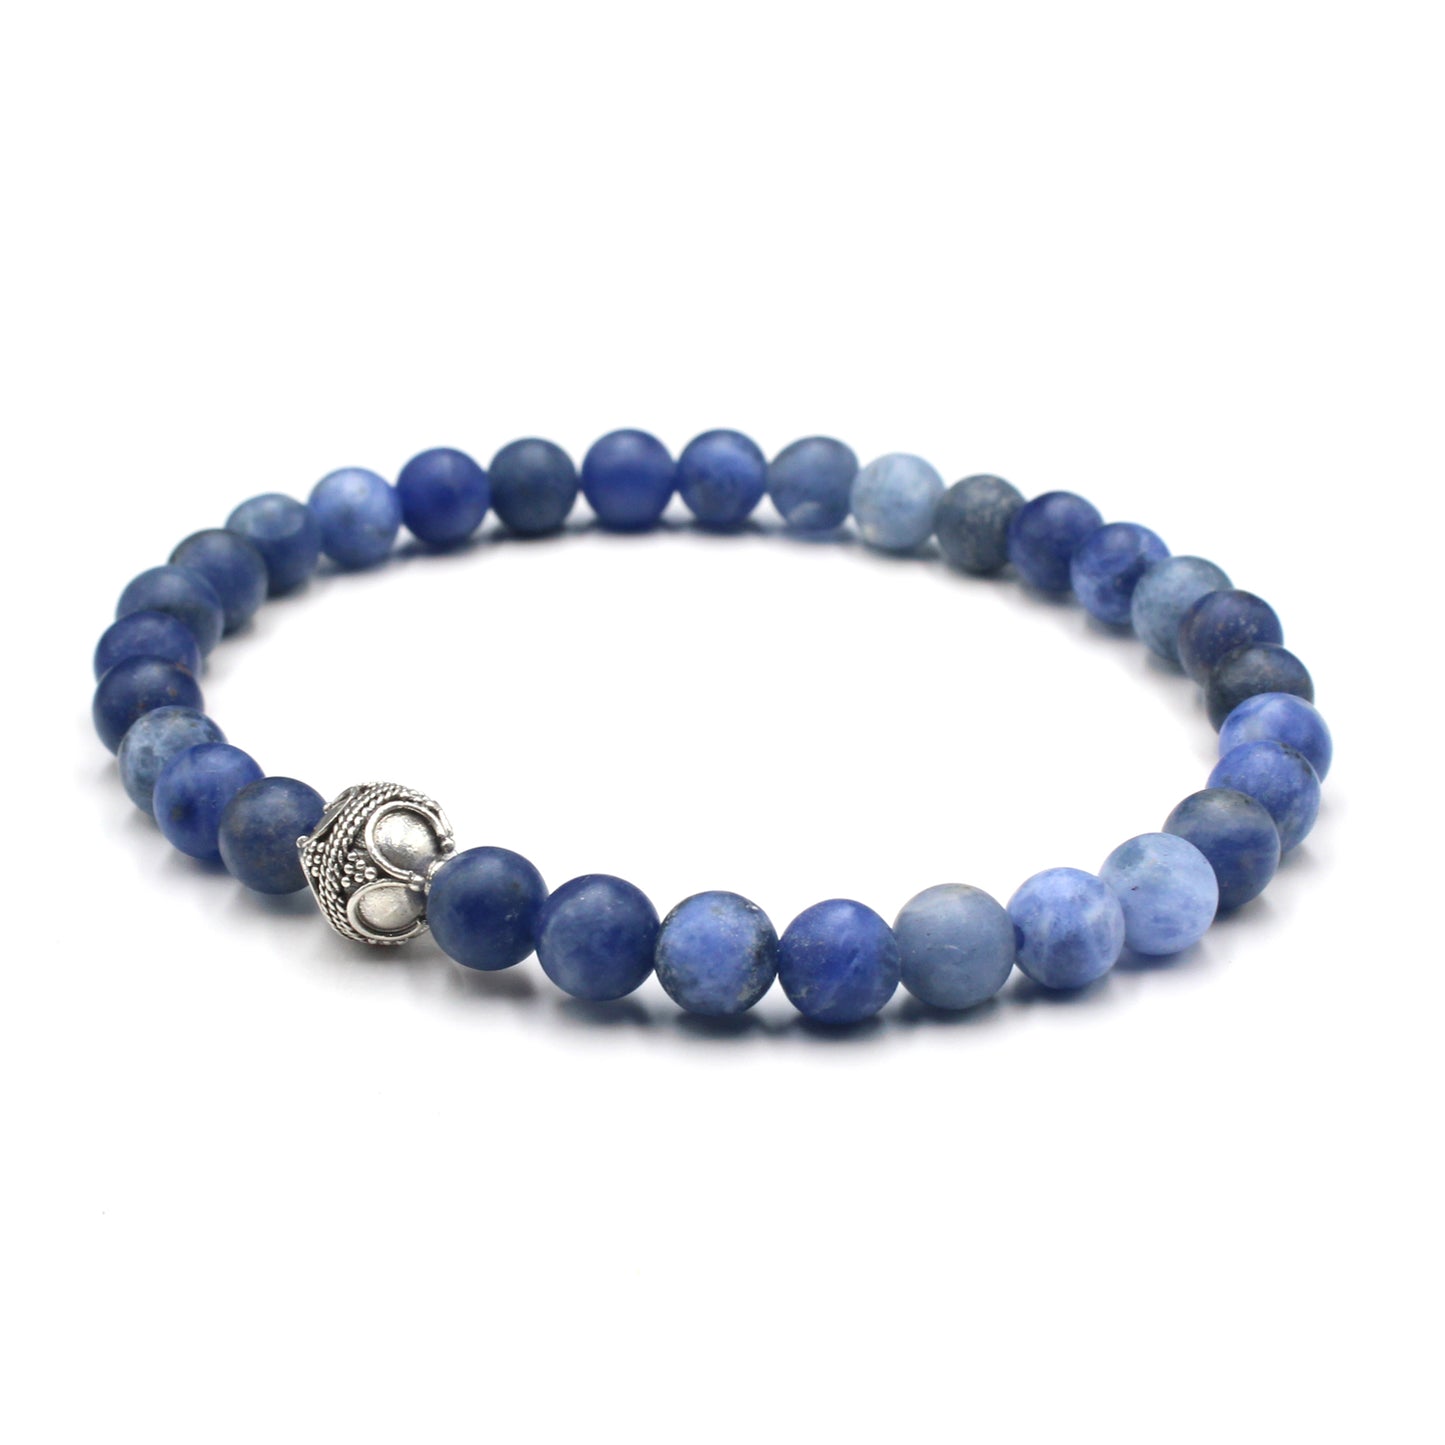 Matte Sodalite and Sterling Silver